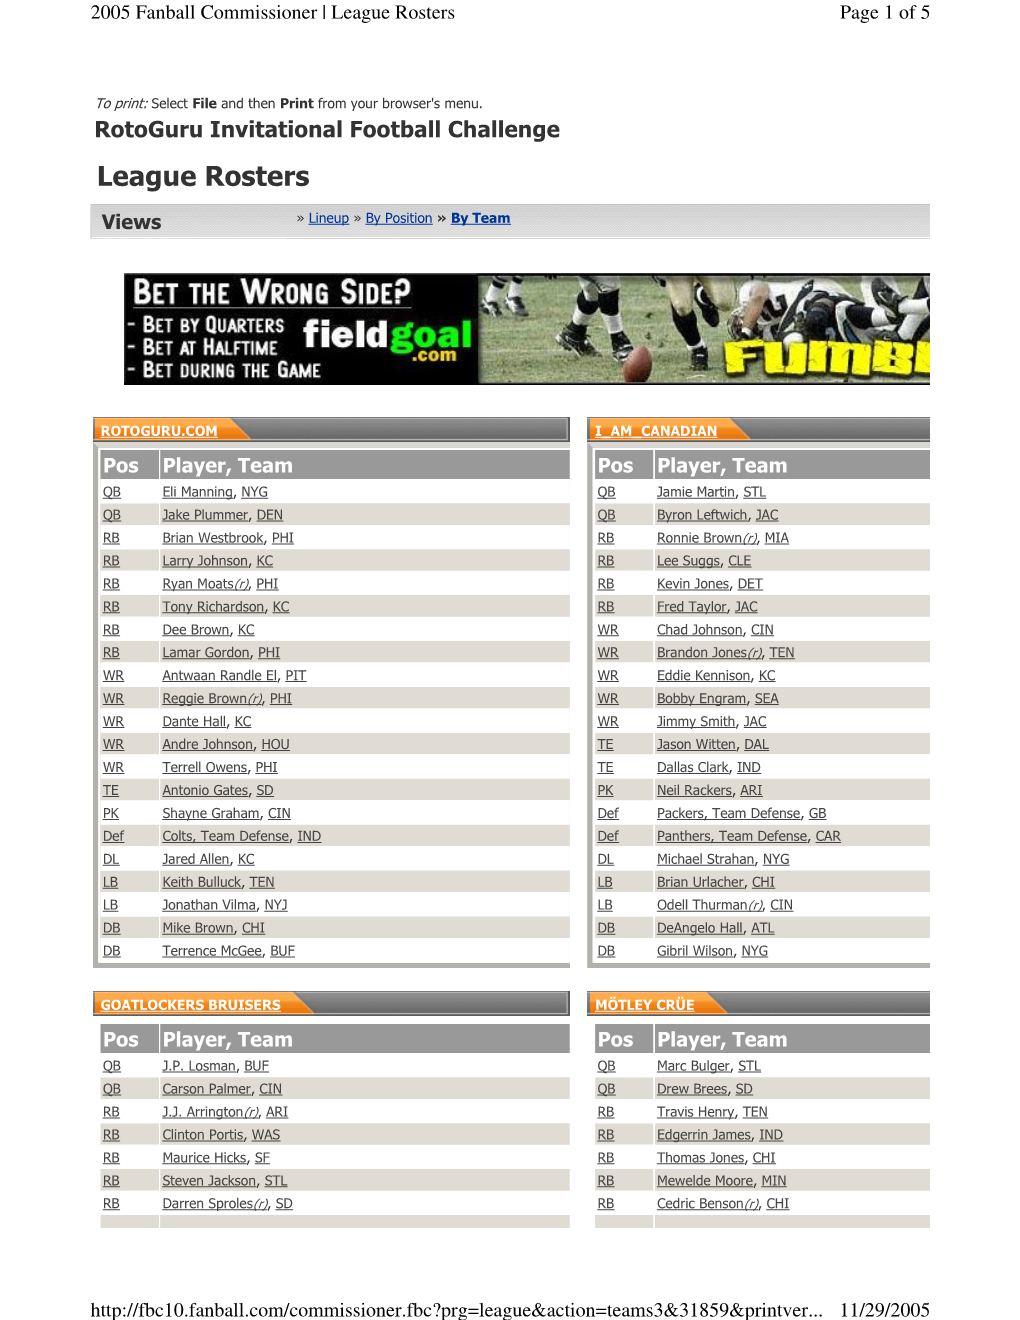 League Rosters Page 1 of 5